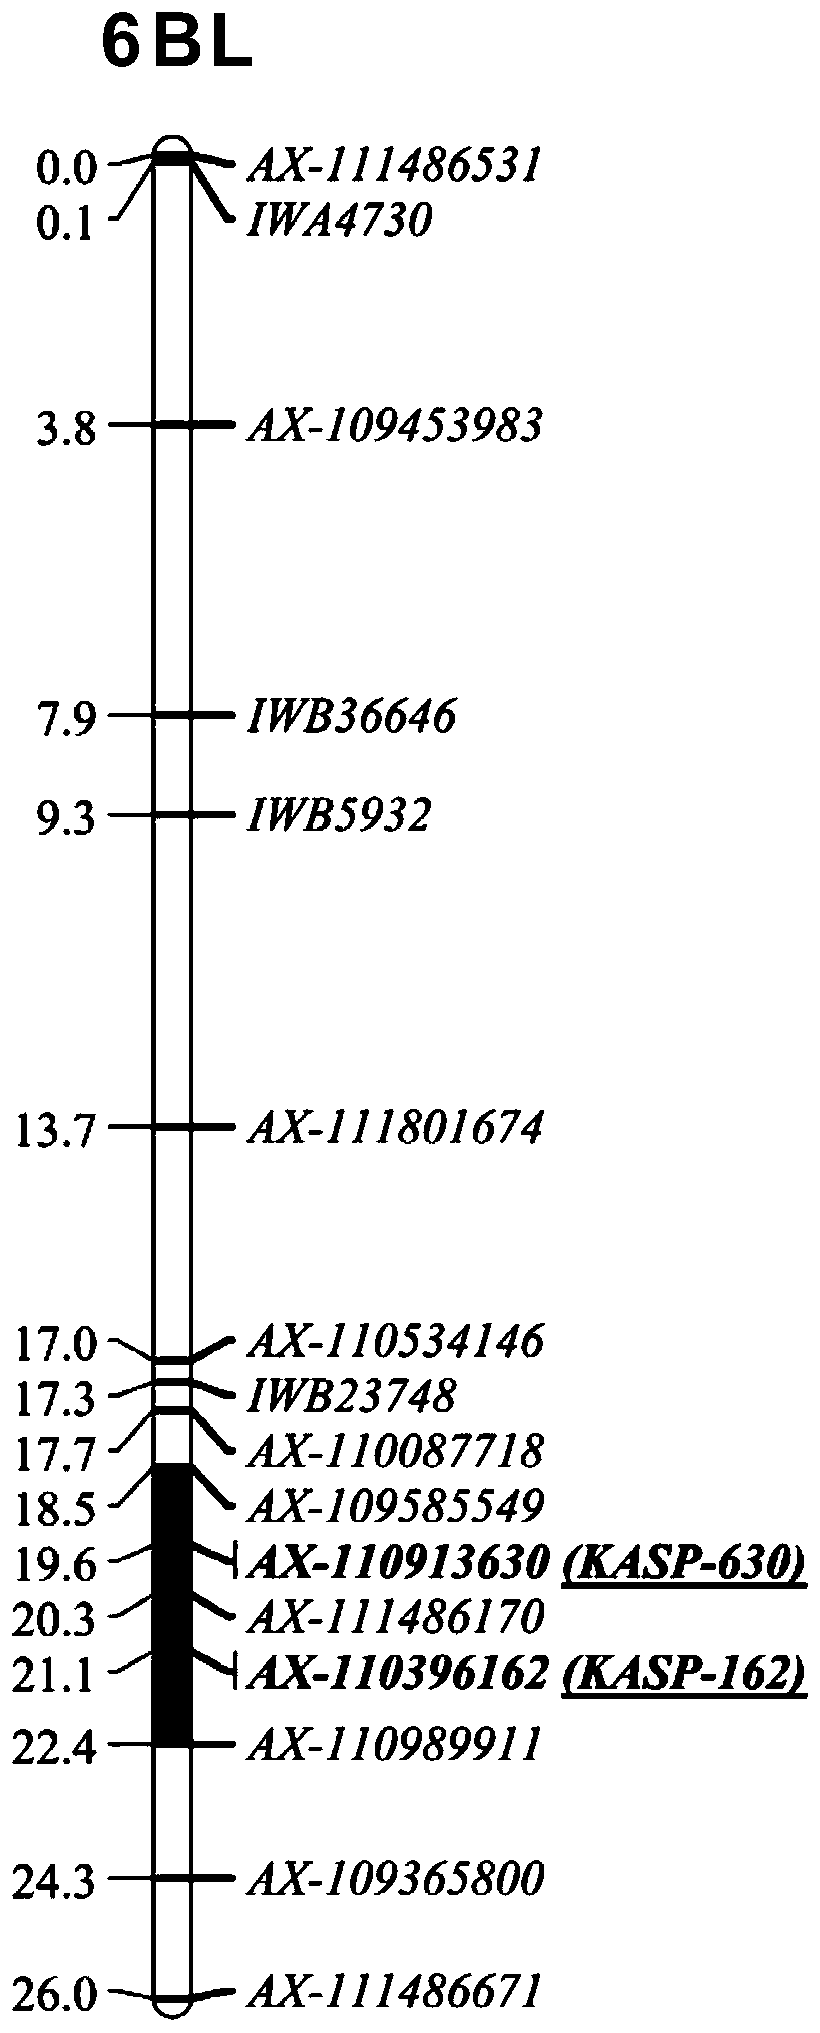 Chain KASP molecular markers, primers and application of wheat anti-yellow-rust gene QYr.nwafu-6BL.2